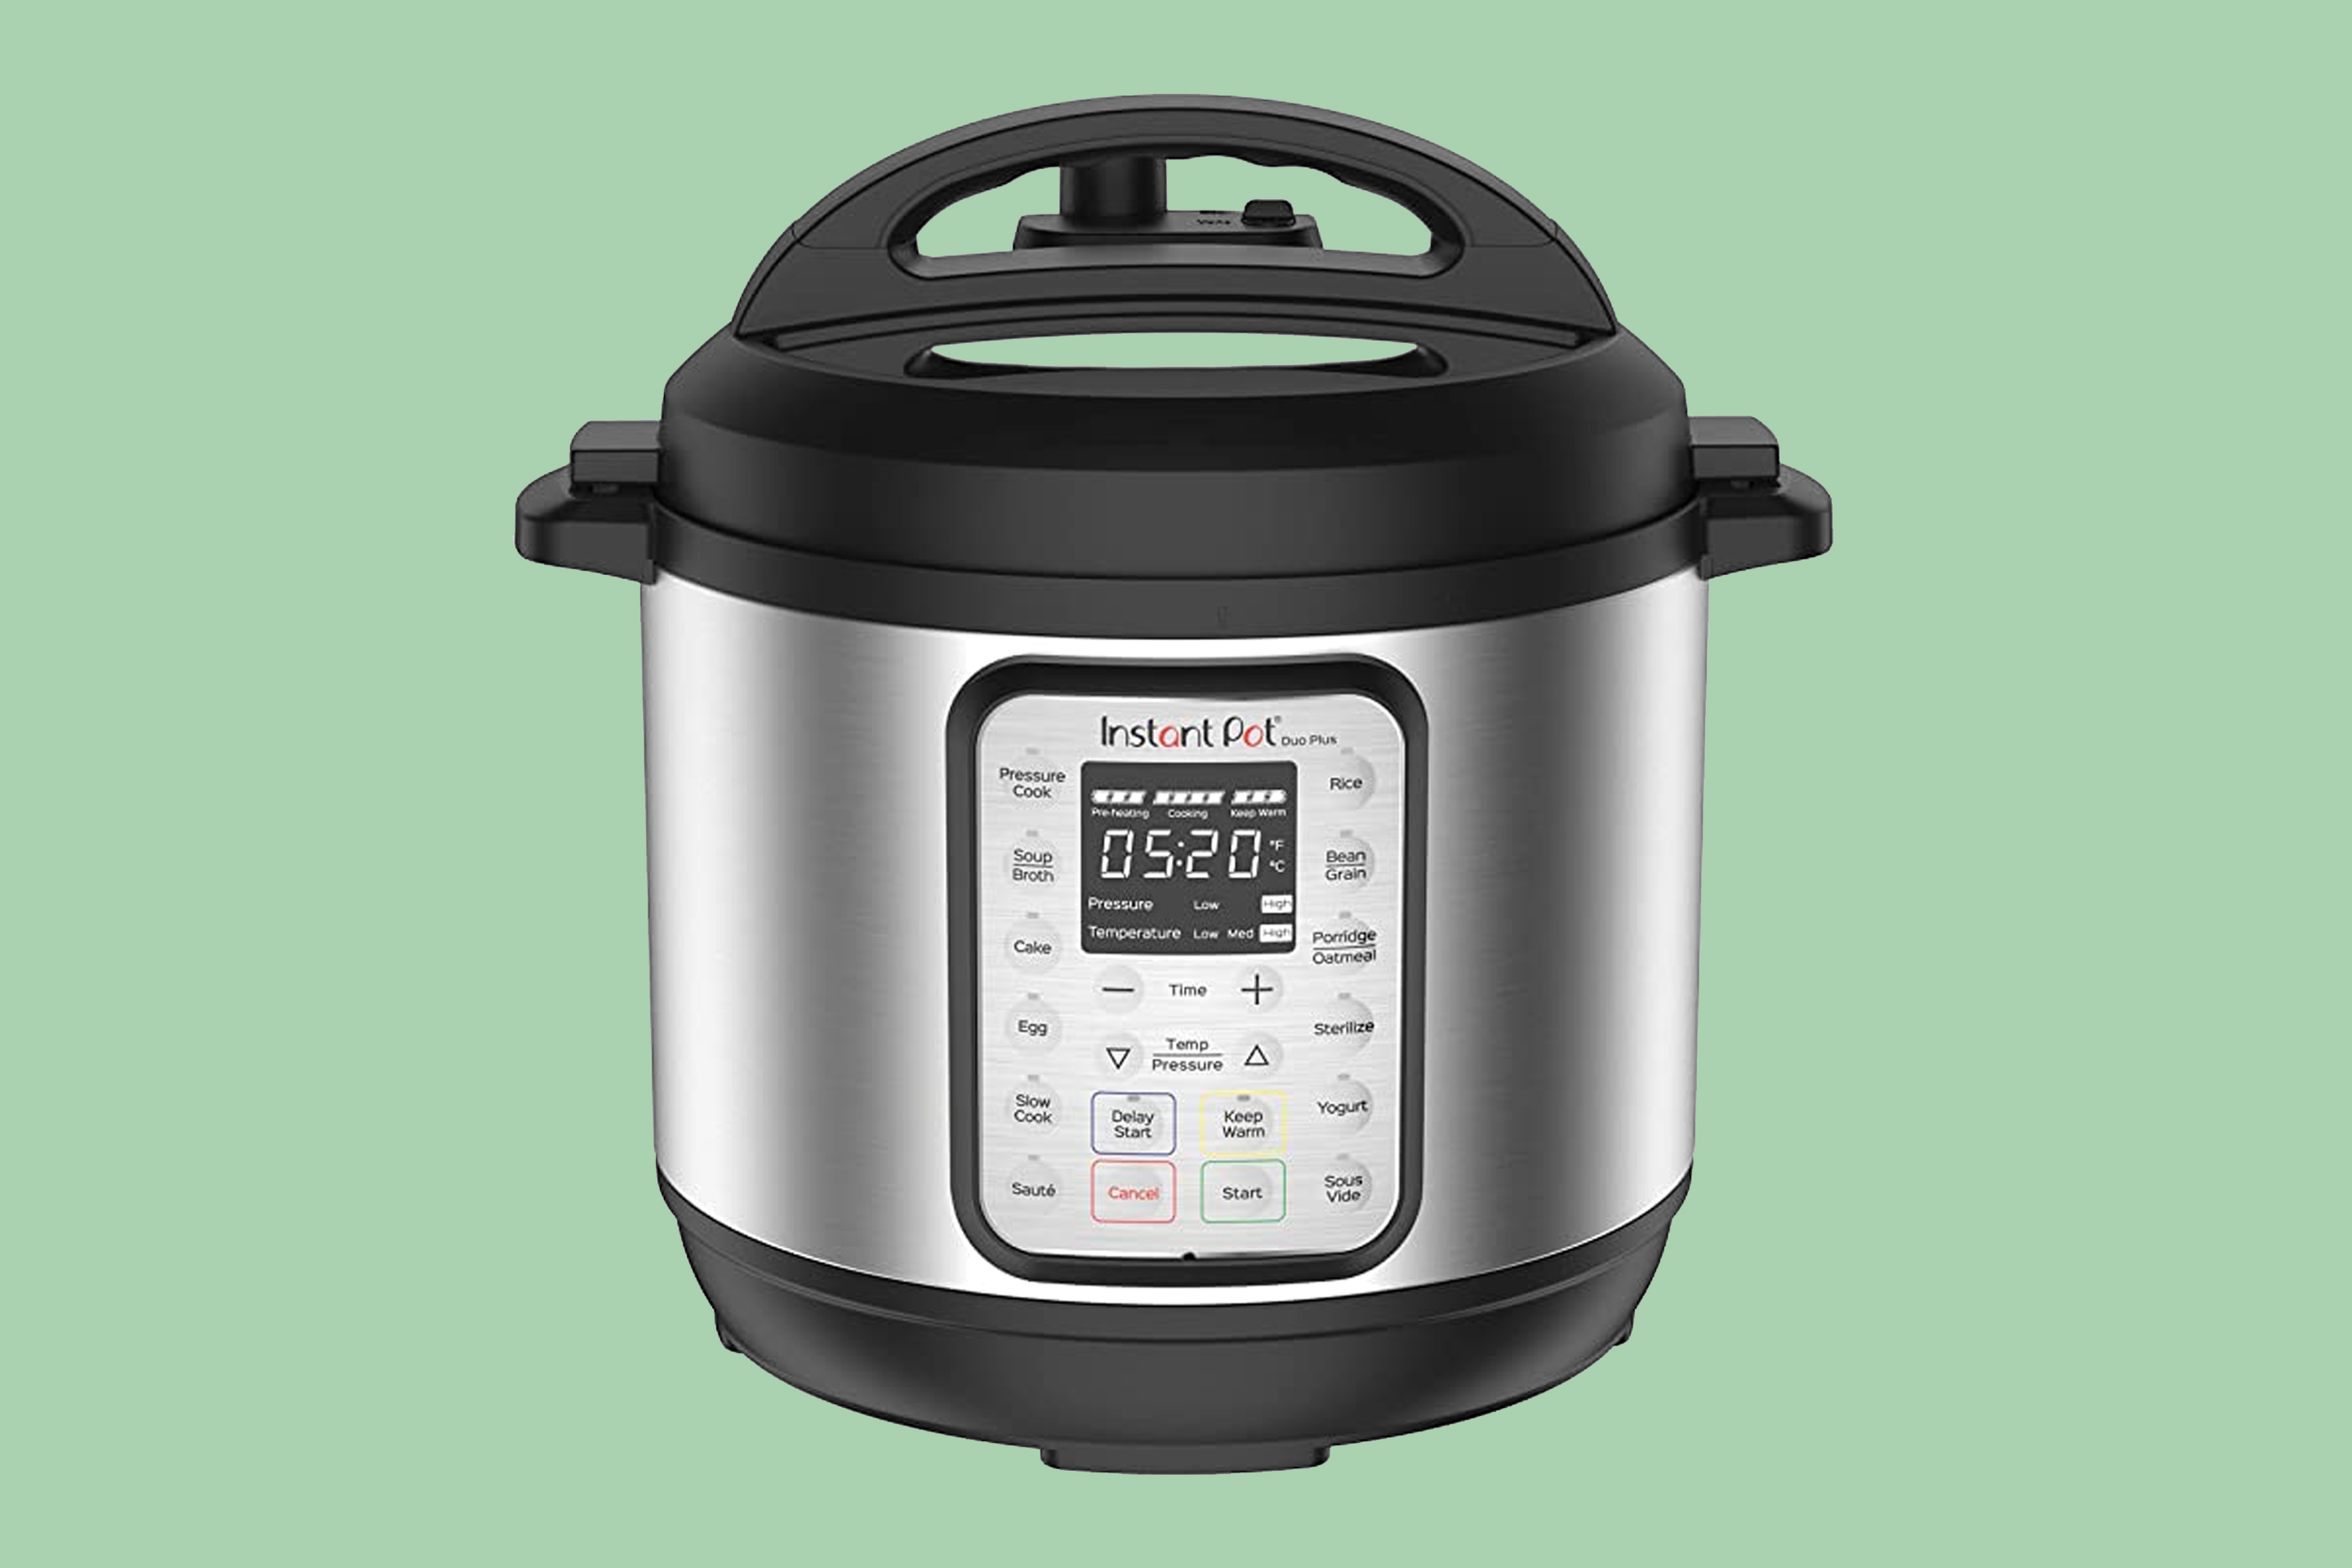 The Instant Pot Air Fryer Pressure Cooker Is $100 for Cyber Week